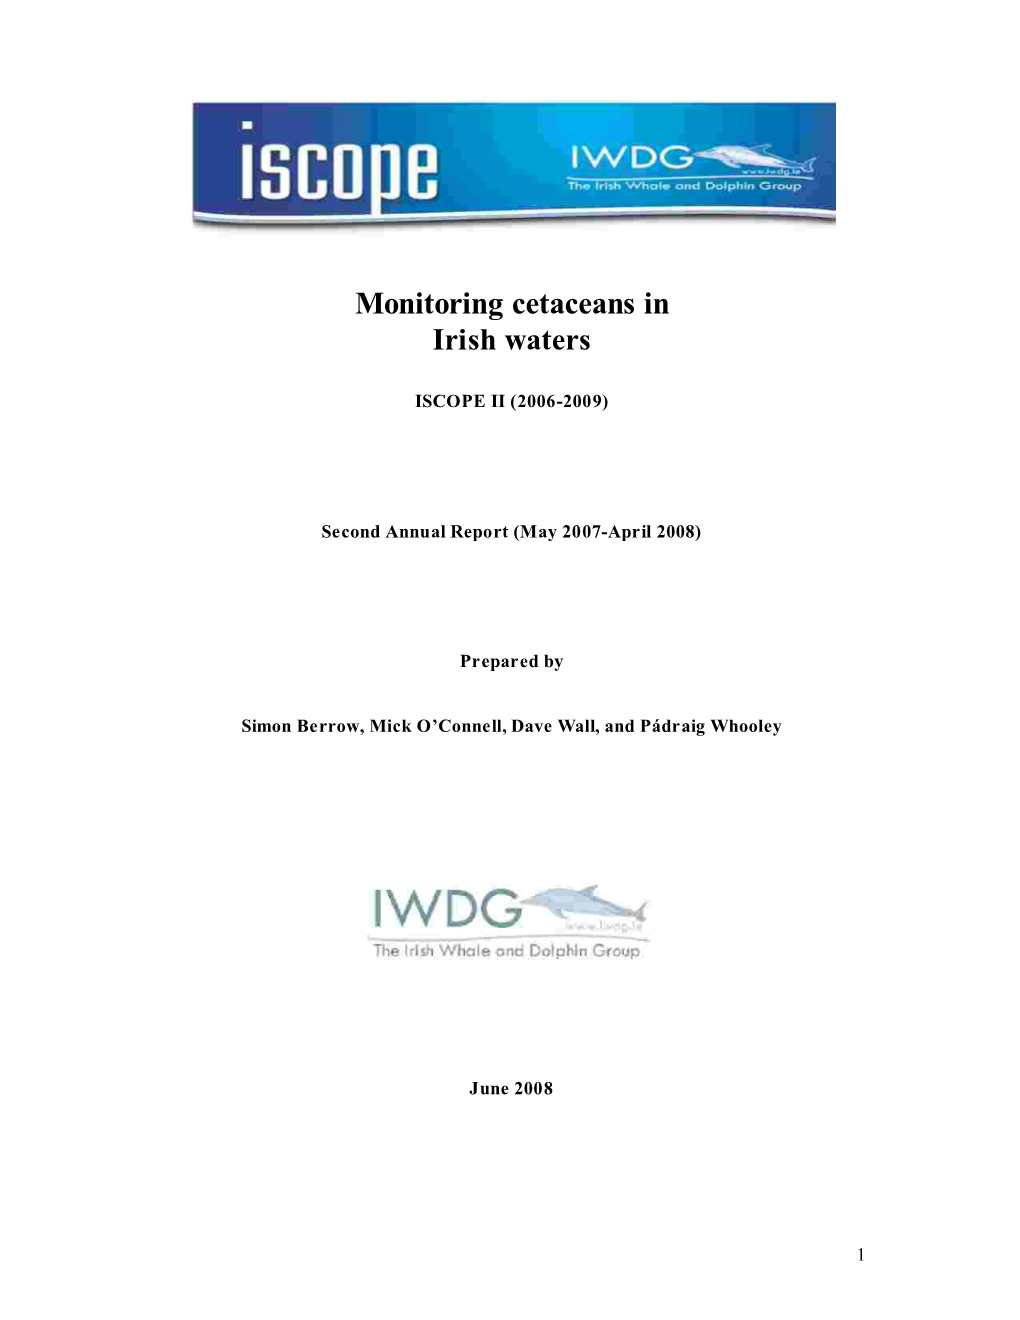 ISCOPE II Second Annual Report